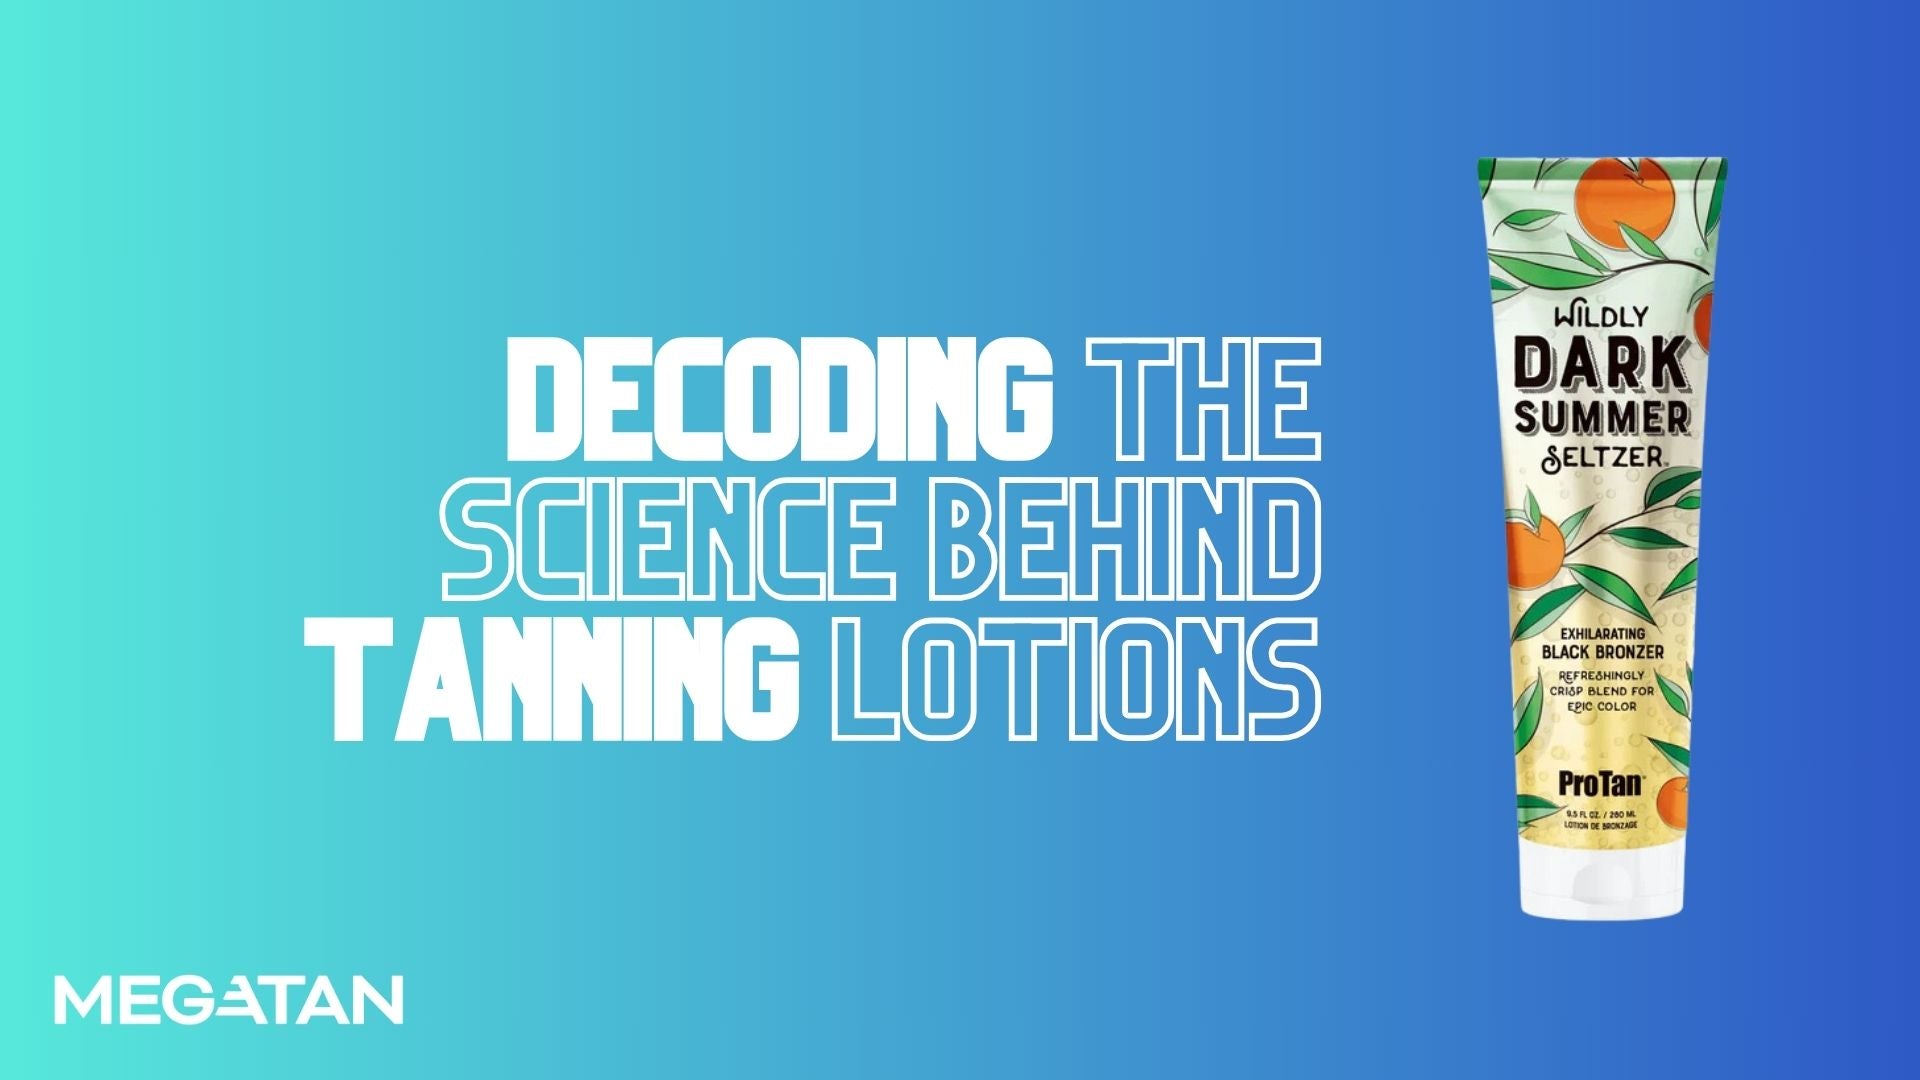 Decoding the Science Behind Tanning Lotions